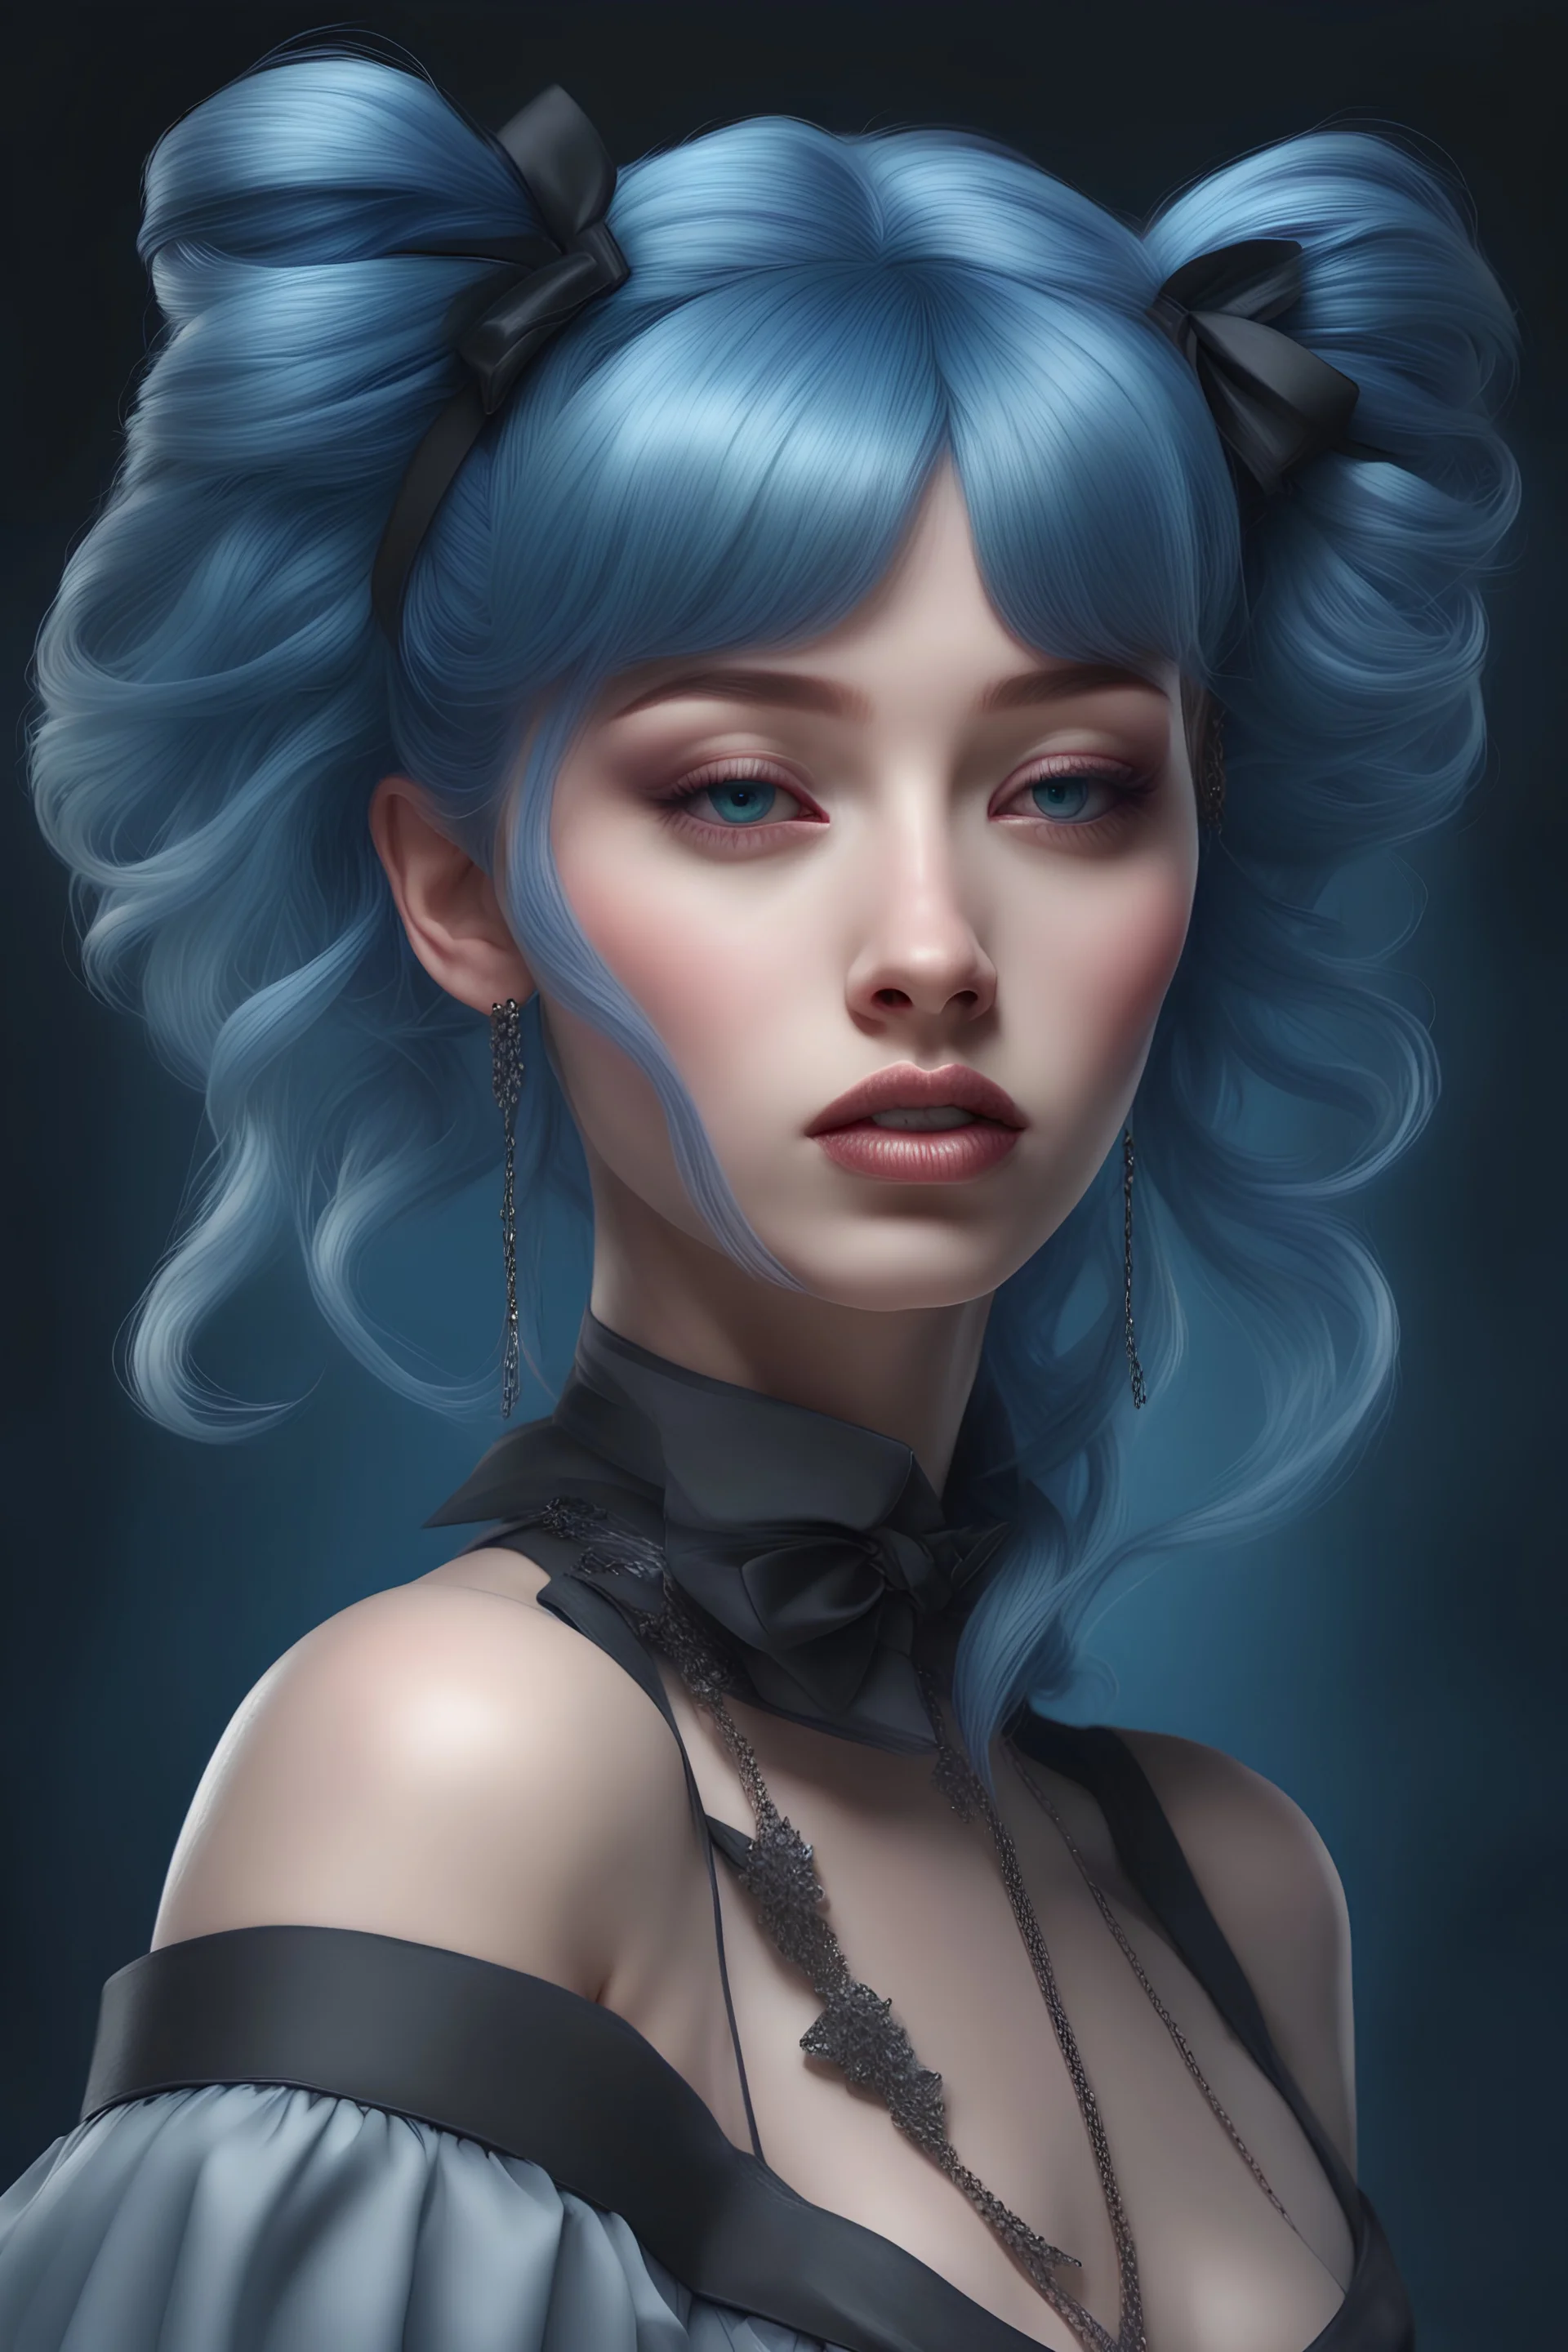 Close-up of woman with blue hair and bow ties, 4k detailed digital art, realistic 4k digital art, realistic 4k digital art, highly detailed 4k digital art, Dark, But detailed digital art, gorgeous digital art, in style of dark fantasy art, digital fantasy portrait, exquisite digital illustration, beautiful digital artwork, beautiful gorgeous digital art, dark fantasy style art